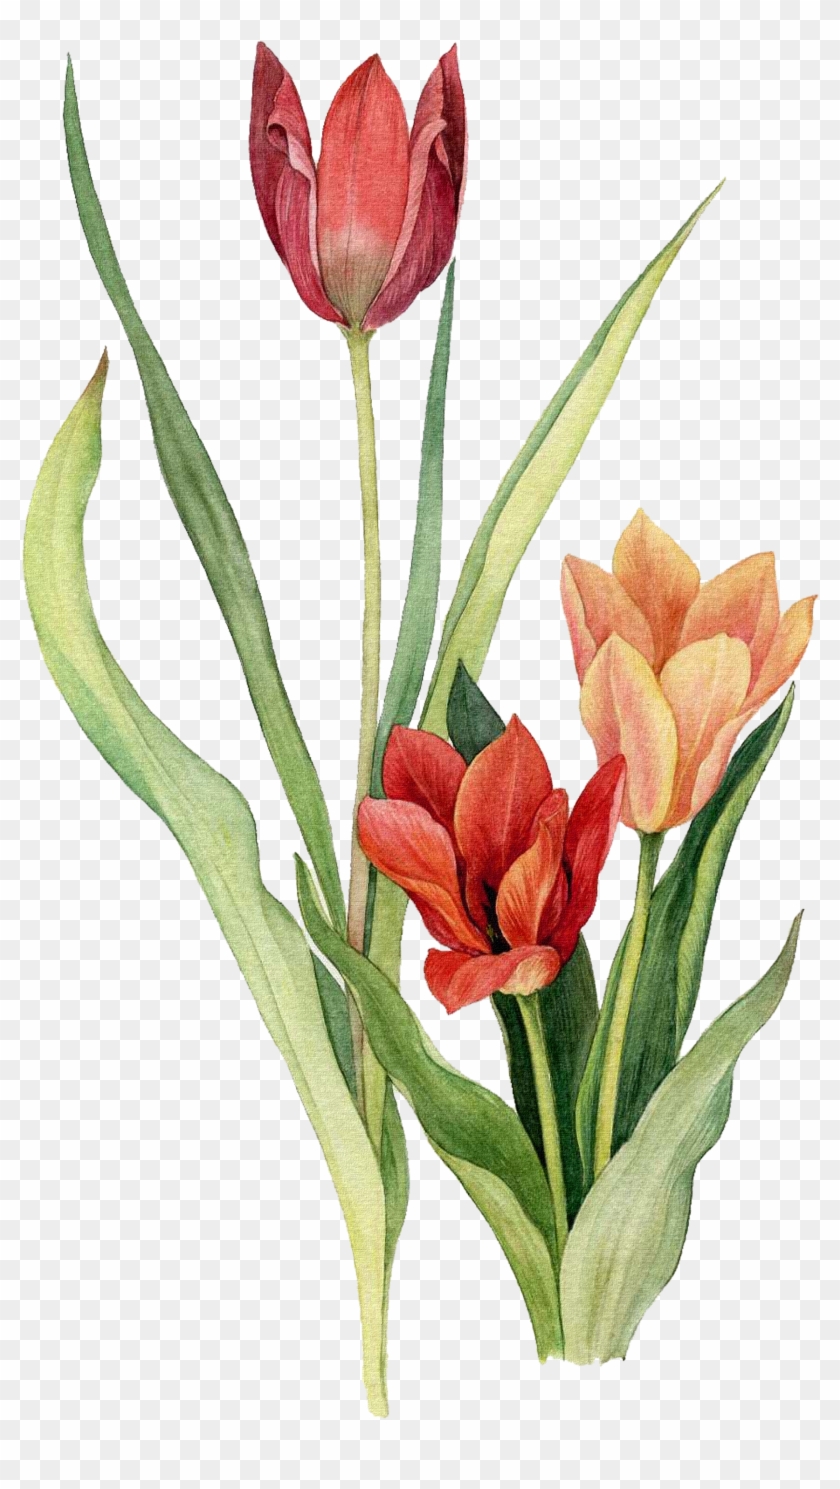 Tulip Flower Watercolor Painting Drawing - Drawing Tulips #1280906